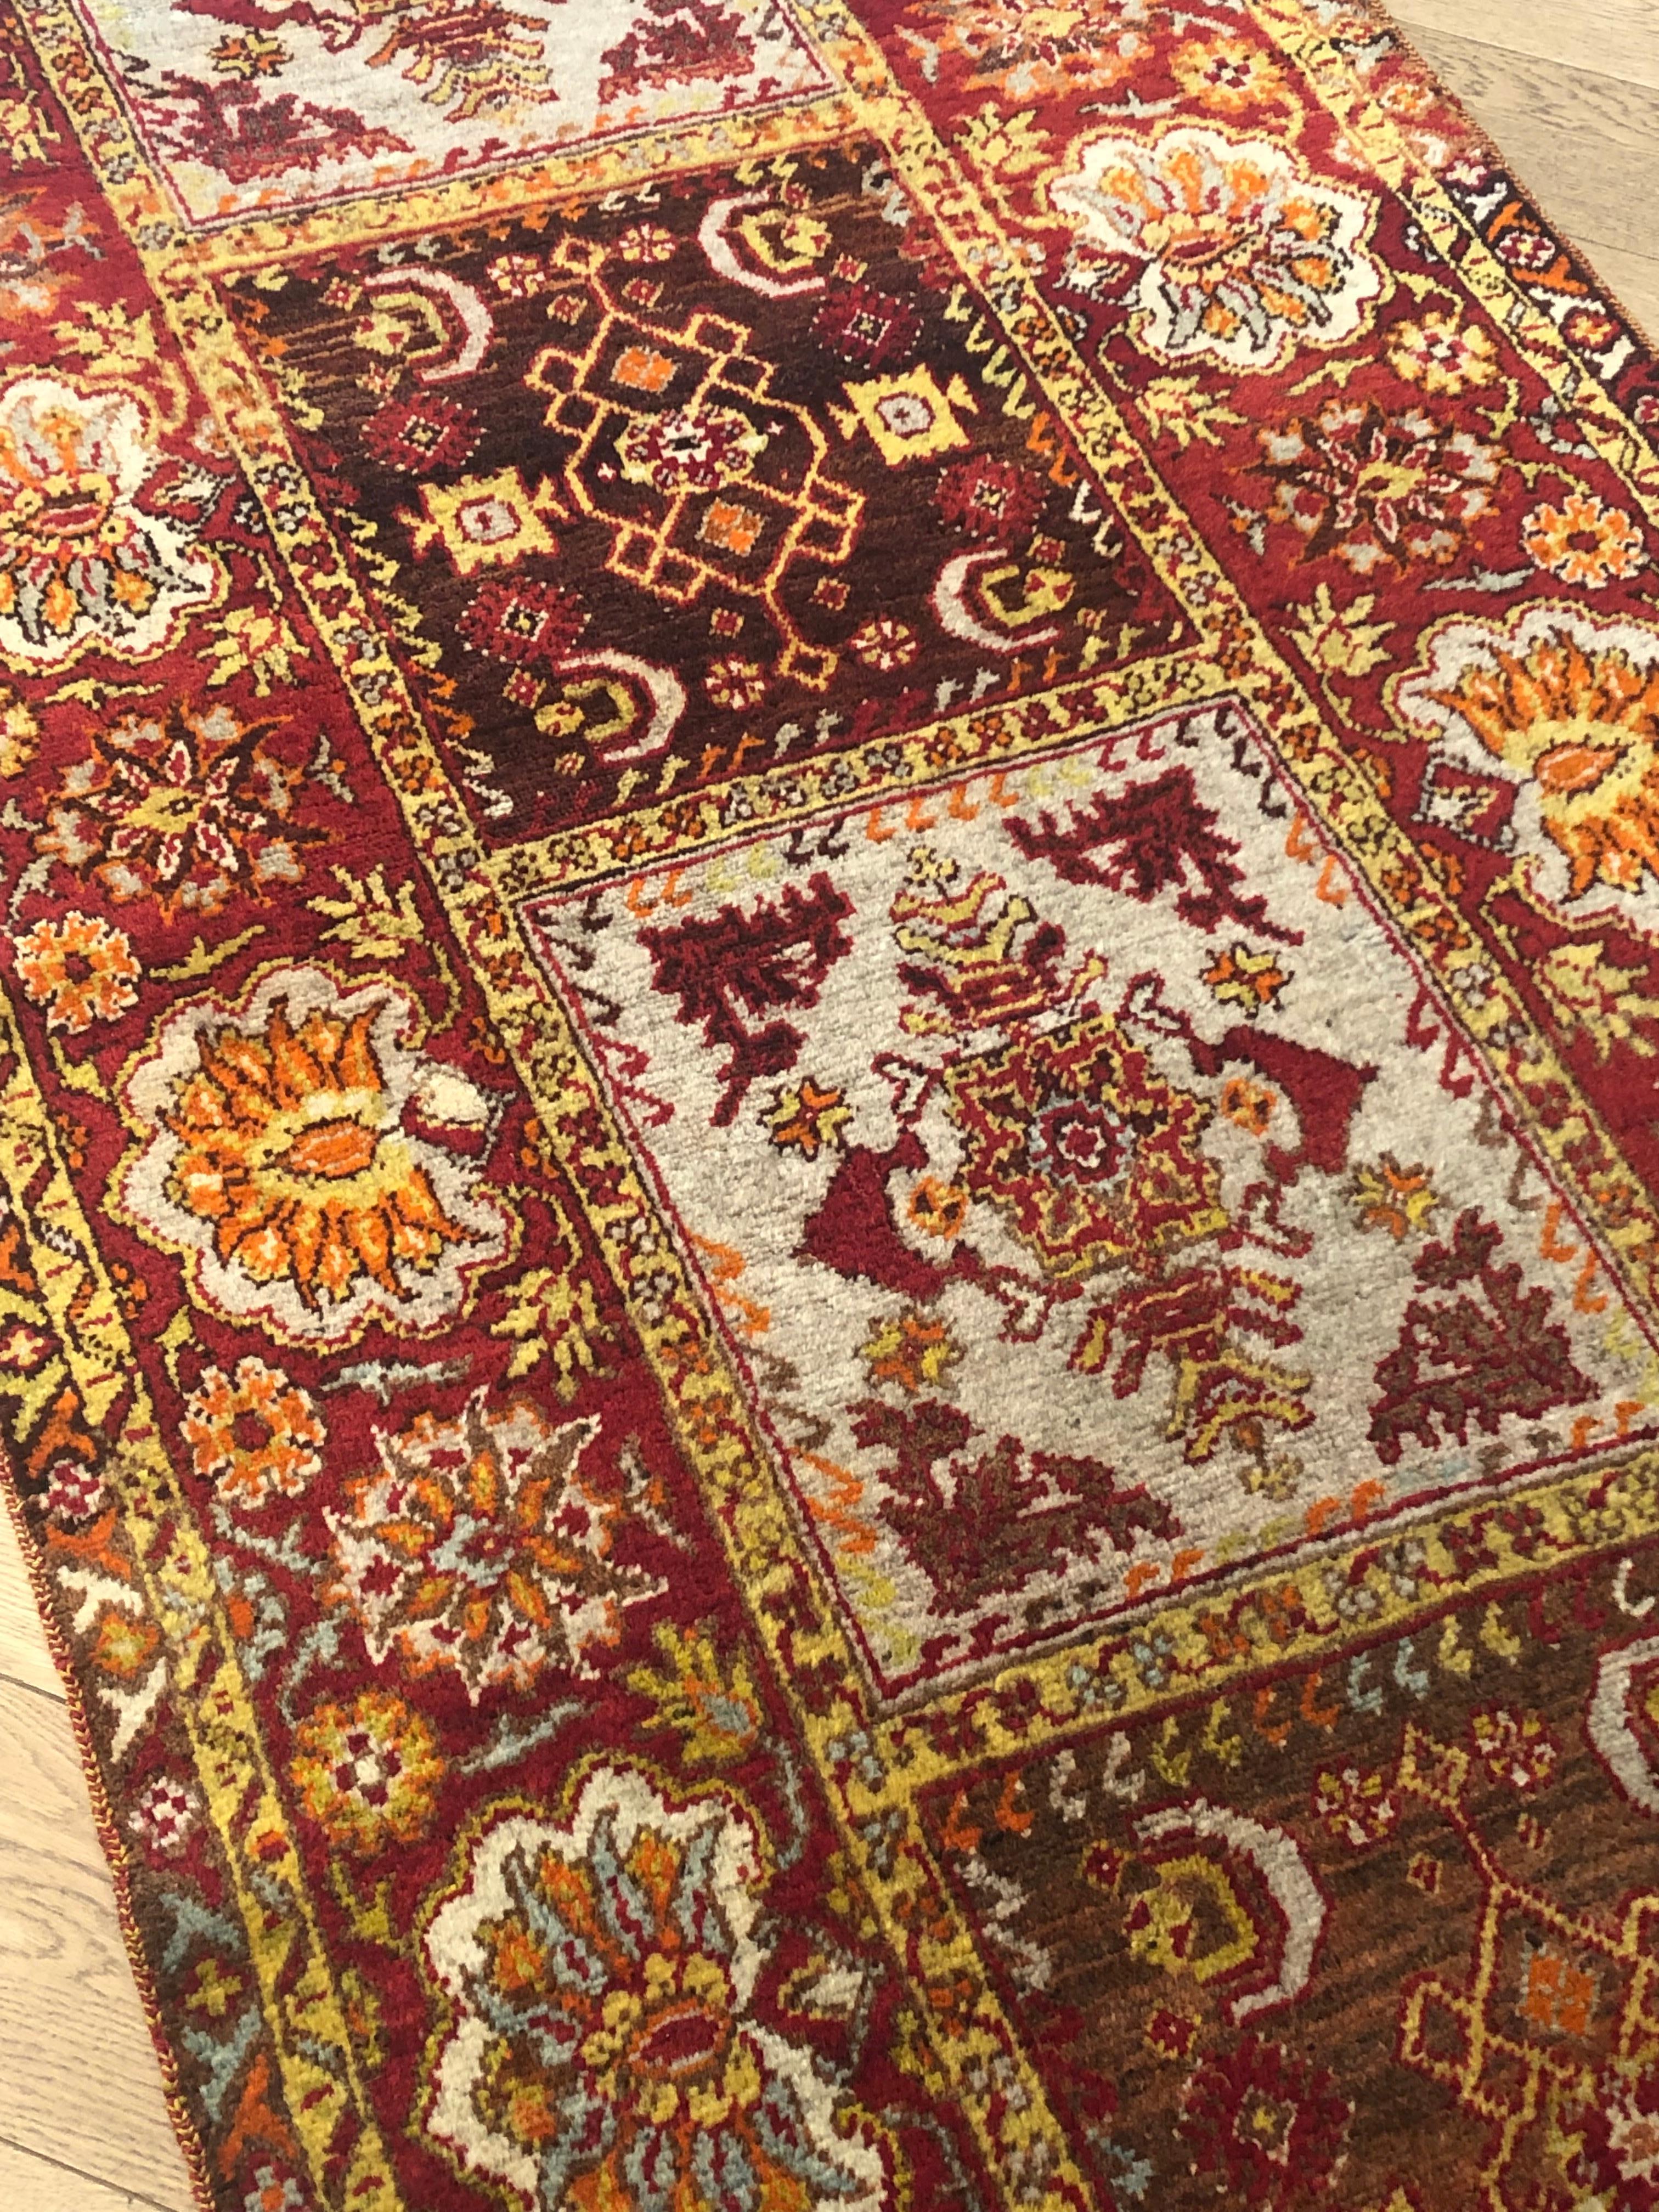 20th Century Anatolian Earth Colours Brown Red Yellow Anatolian Rug, ca 1920 For Sale 4